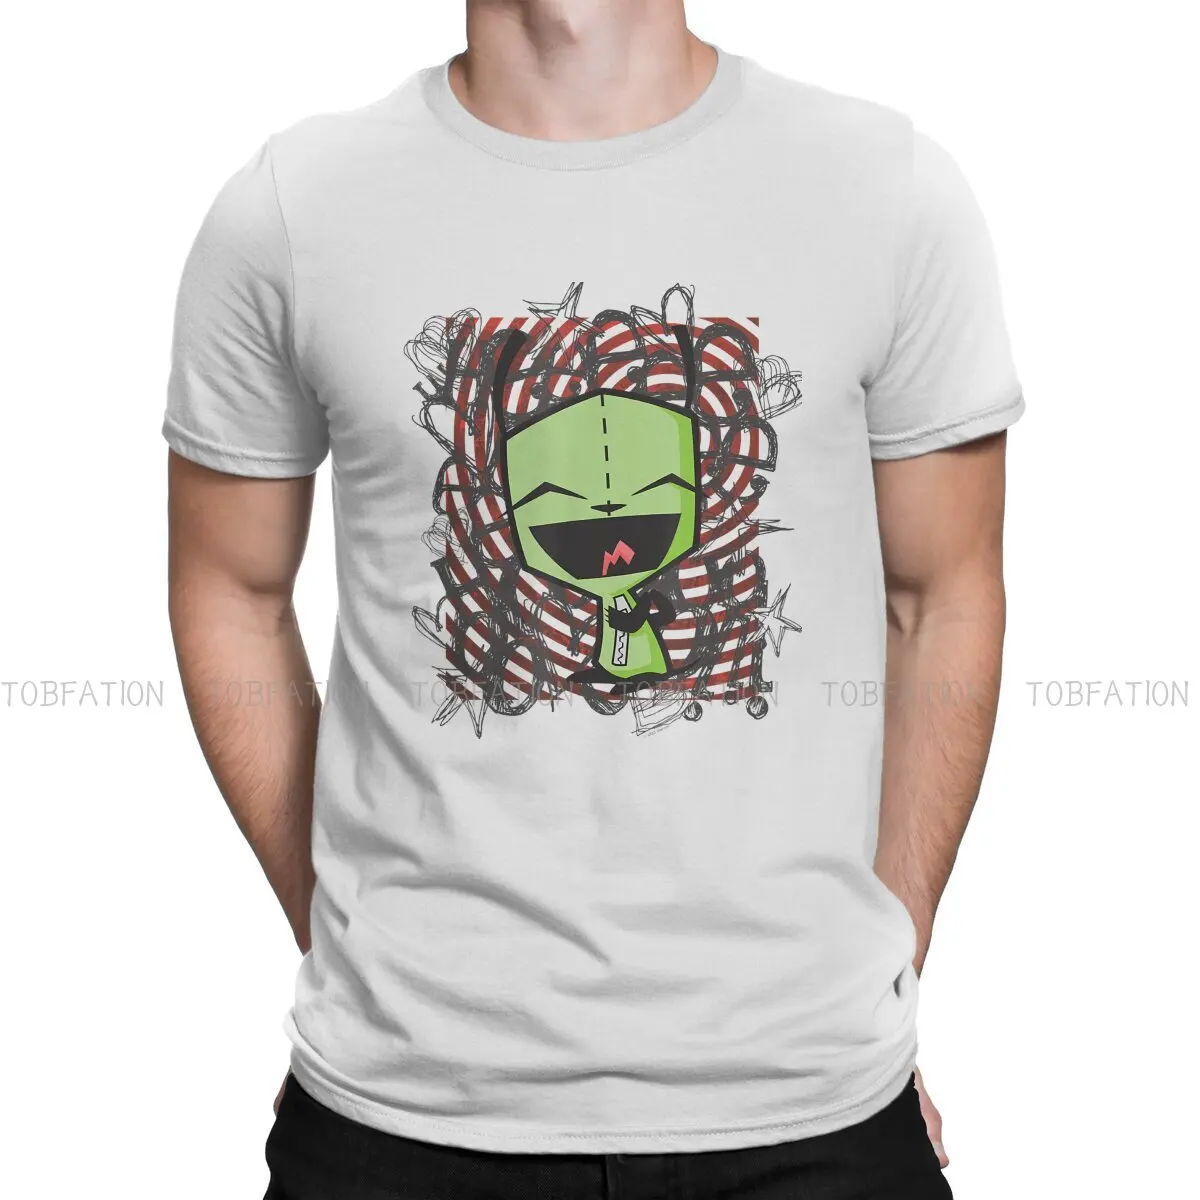 Happy Gir Classic  Hip Hop TShirt Invader Zim Gaz Membrane Animated Leisure T Shirt Newest Stuff For Adult